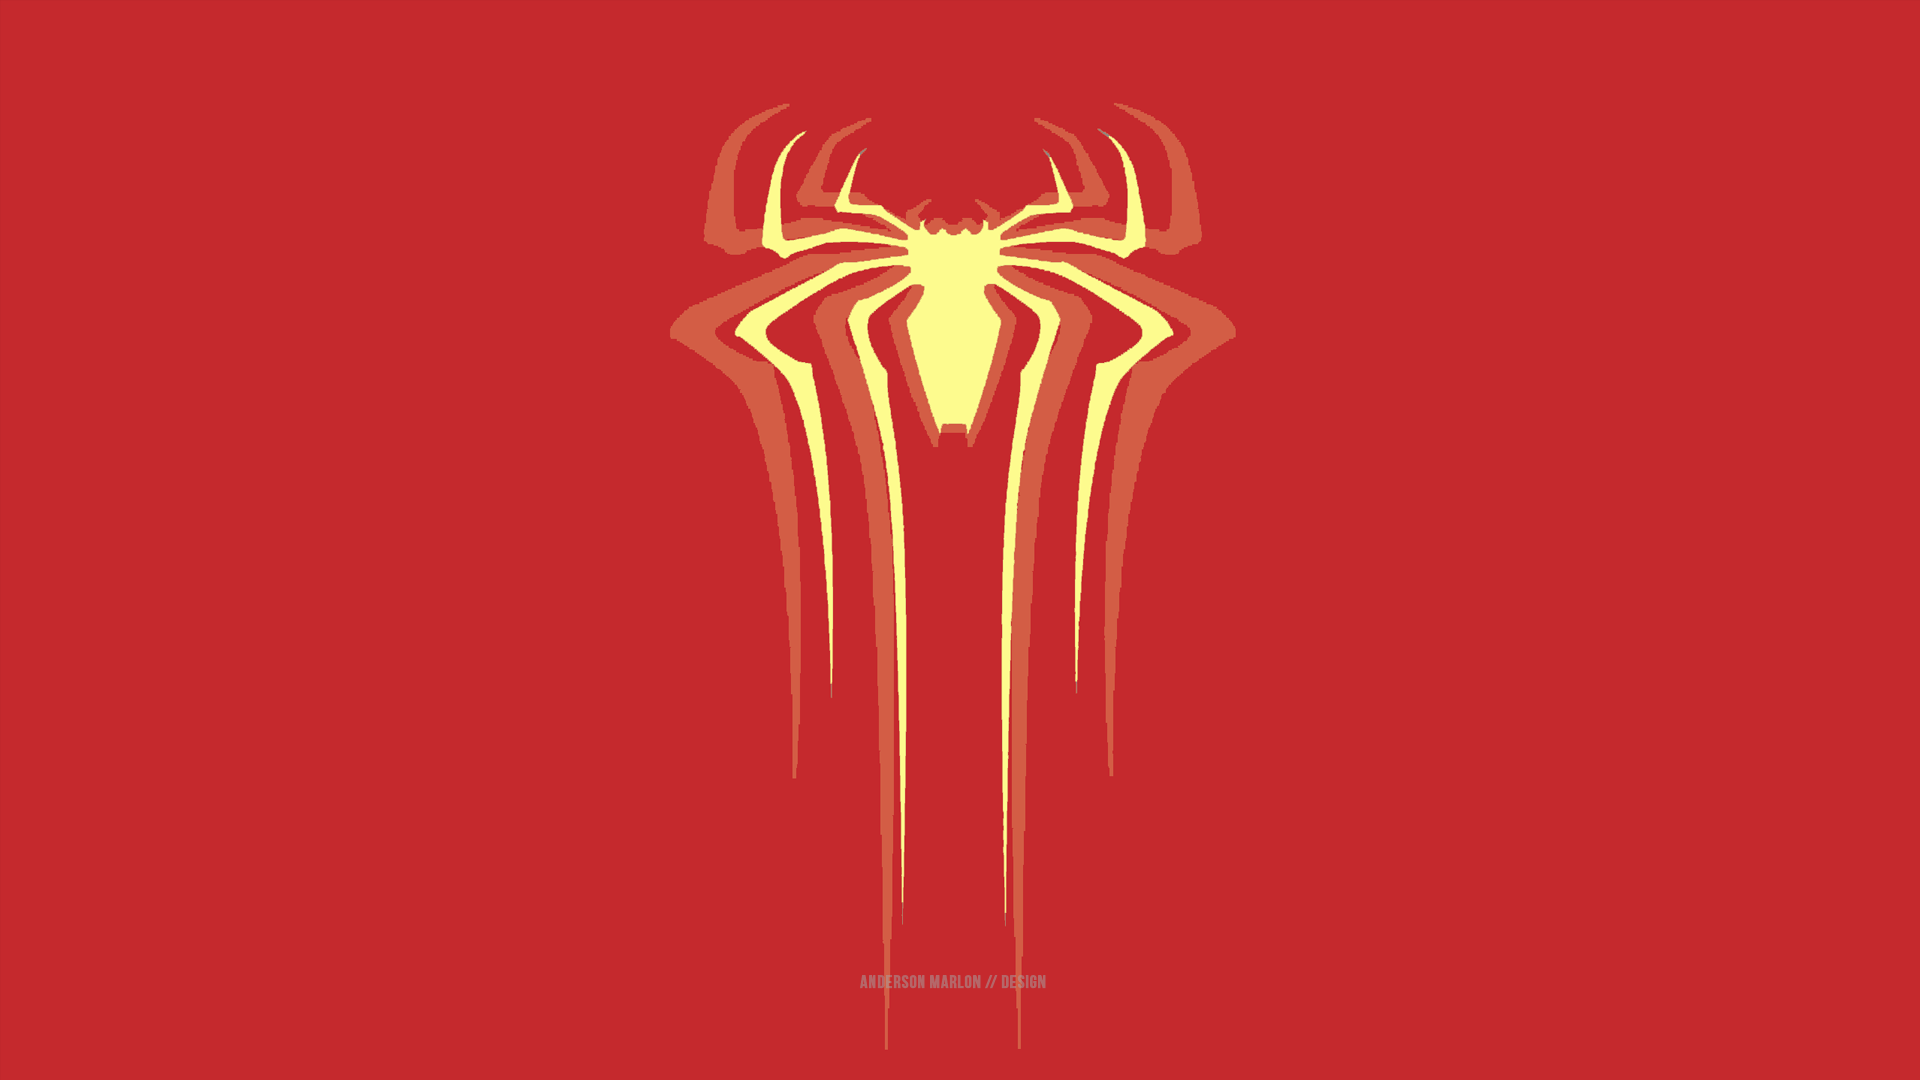 Iron Spider Logo - Iron Spider HD Wallpapers - Wallpaper Cave